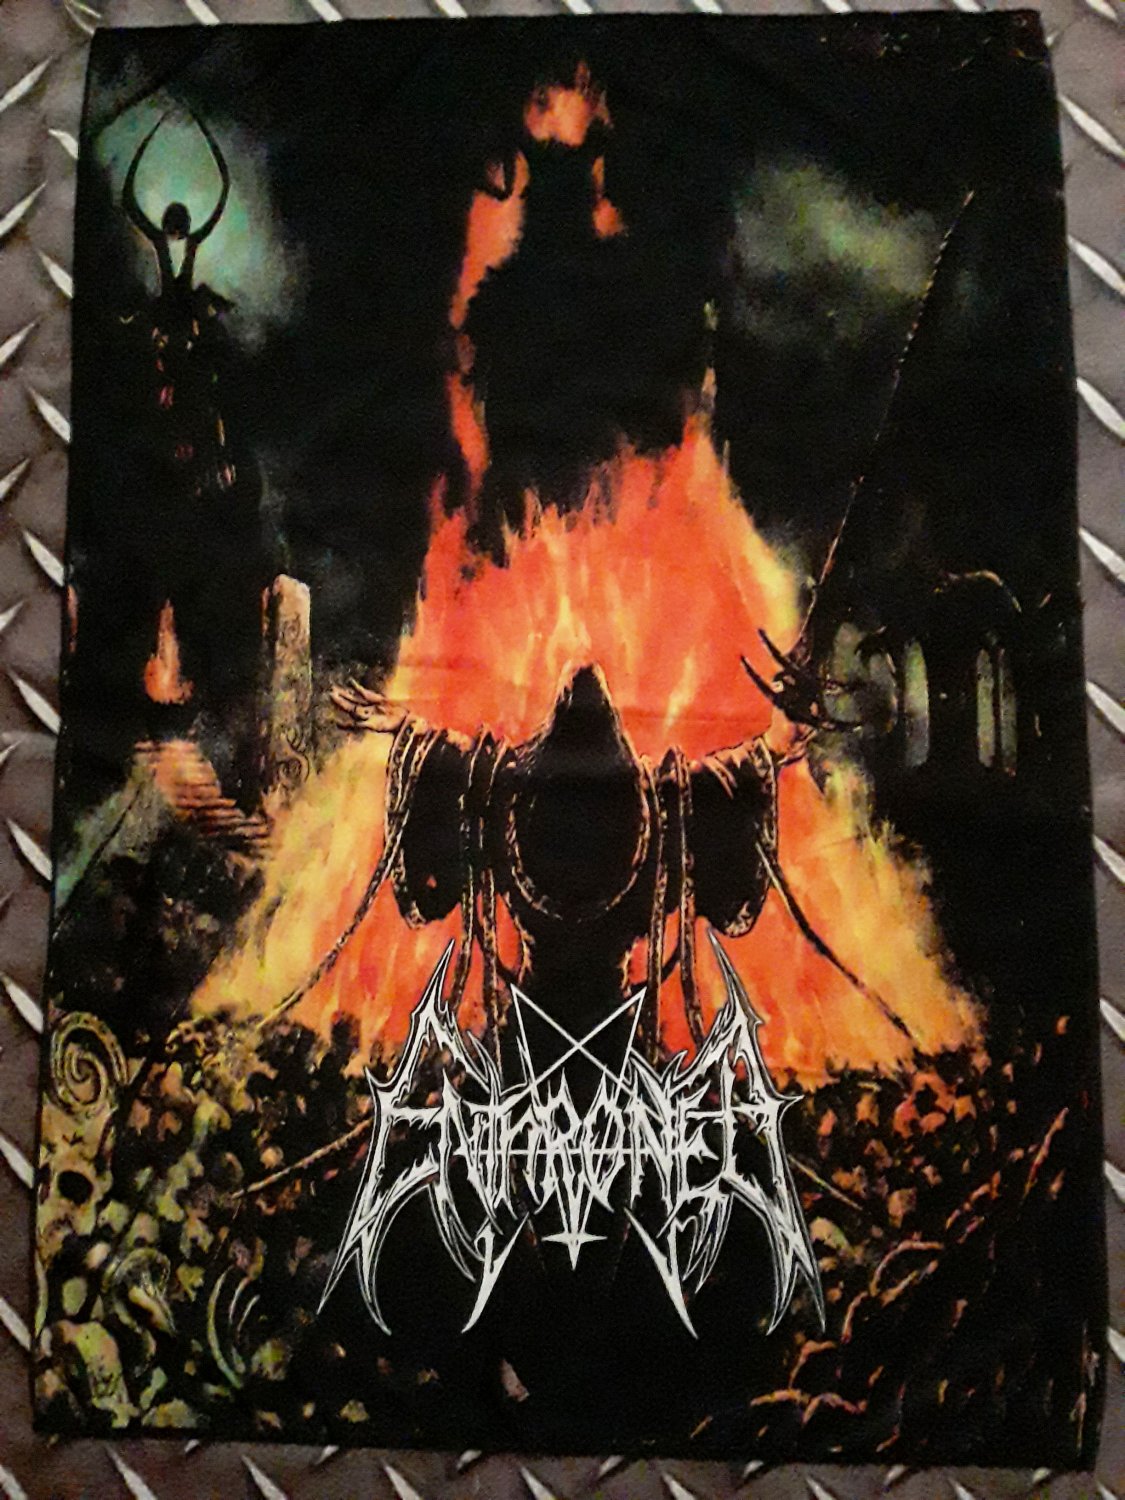 ENTHRONED - Prophecies of pagan fire FLAG cloth POSTER Banner Black METAL